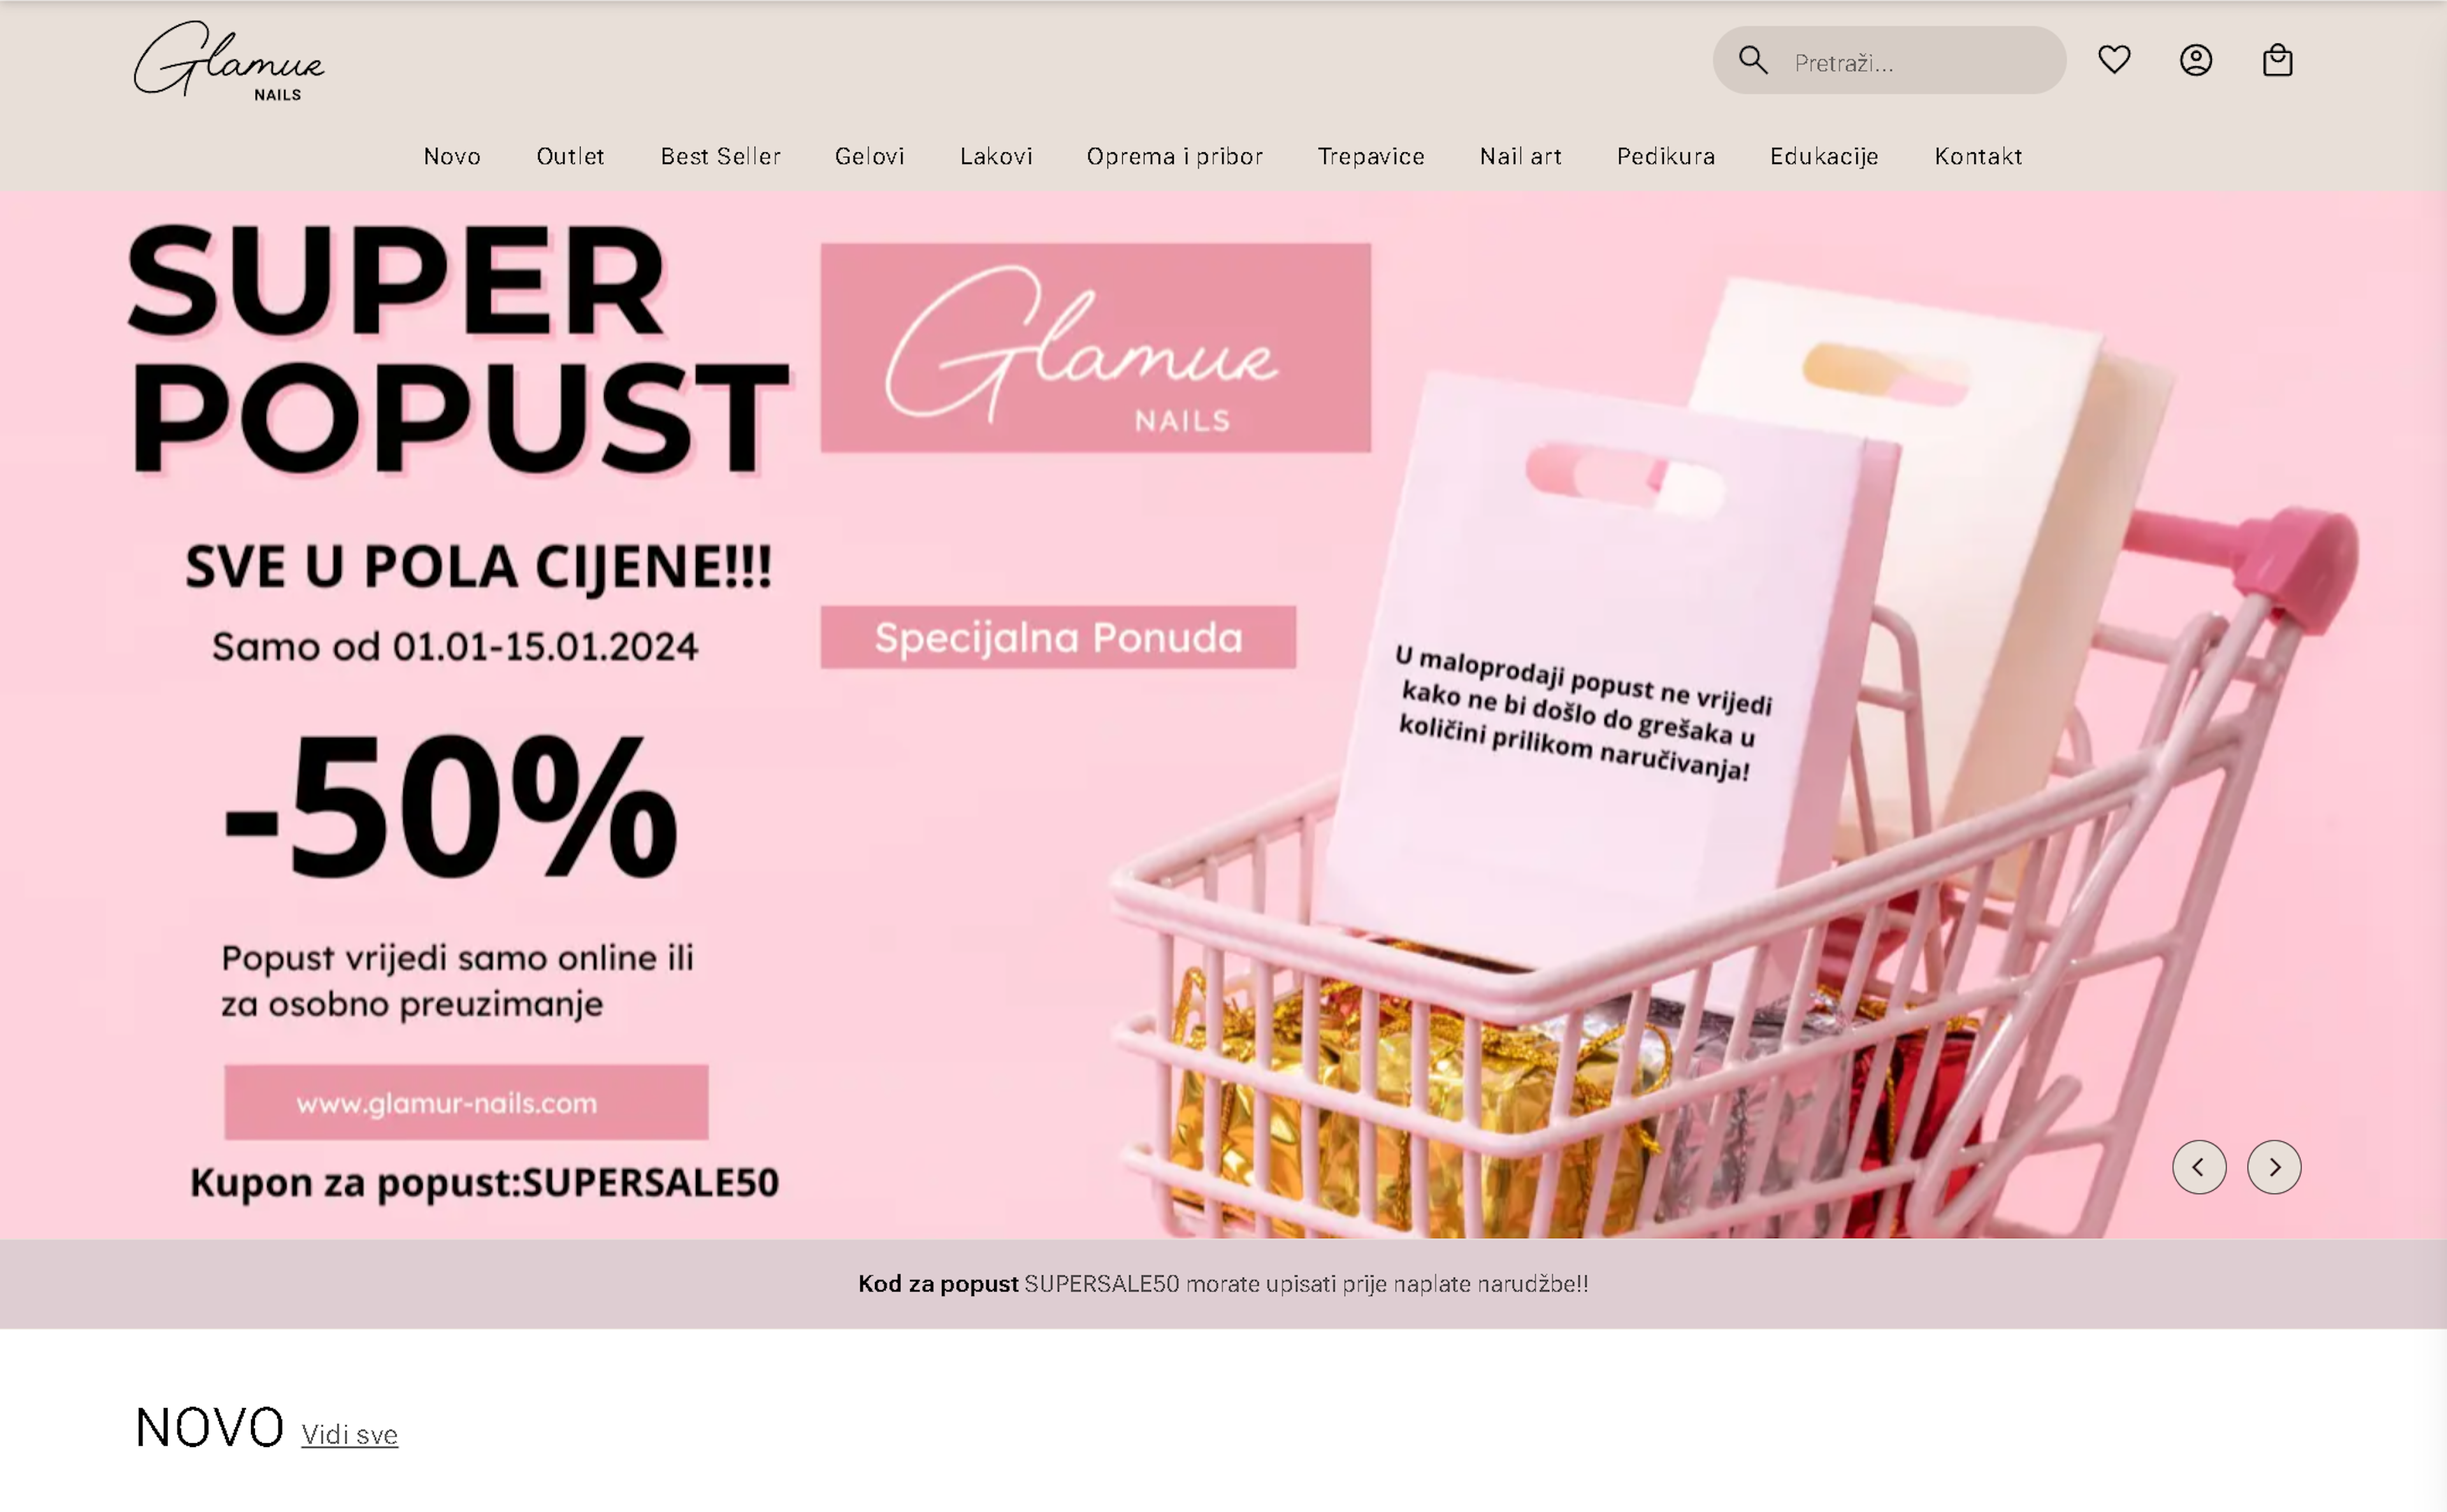 Glamur nails webshop homepage preview